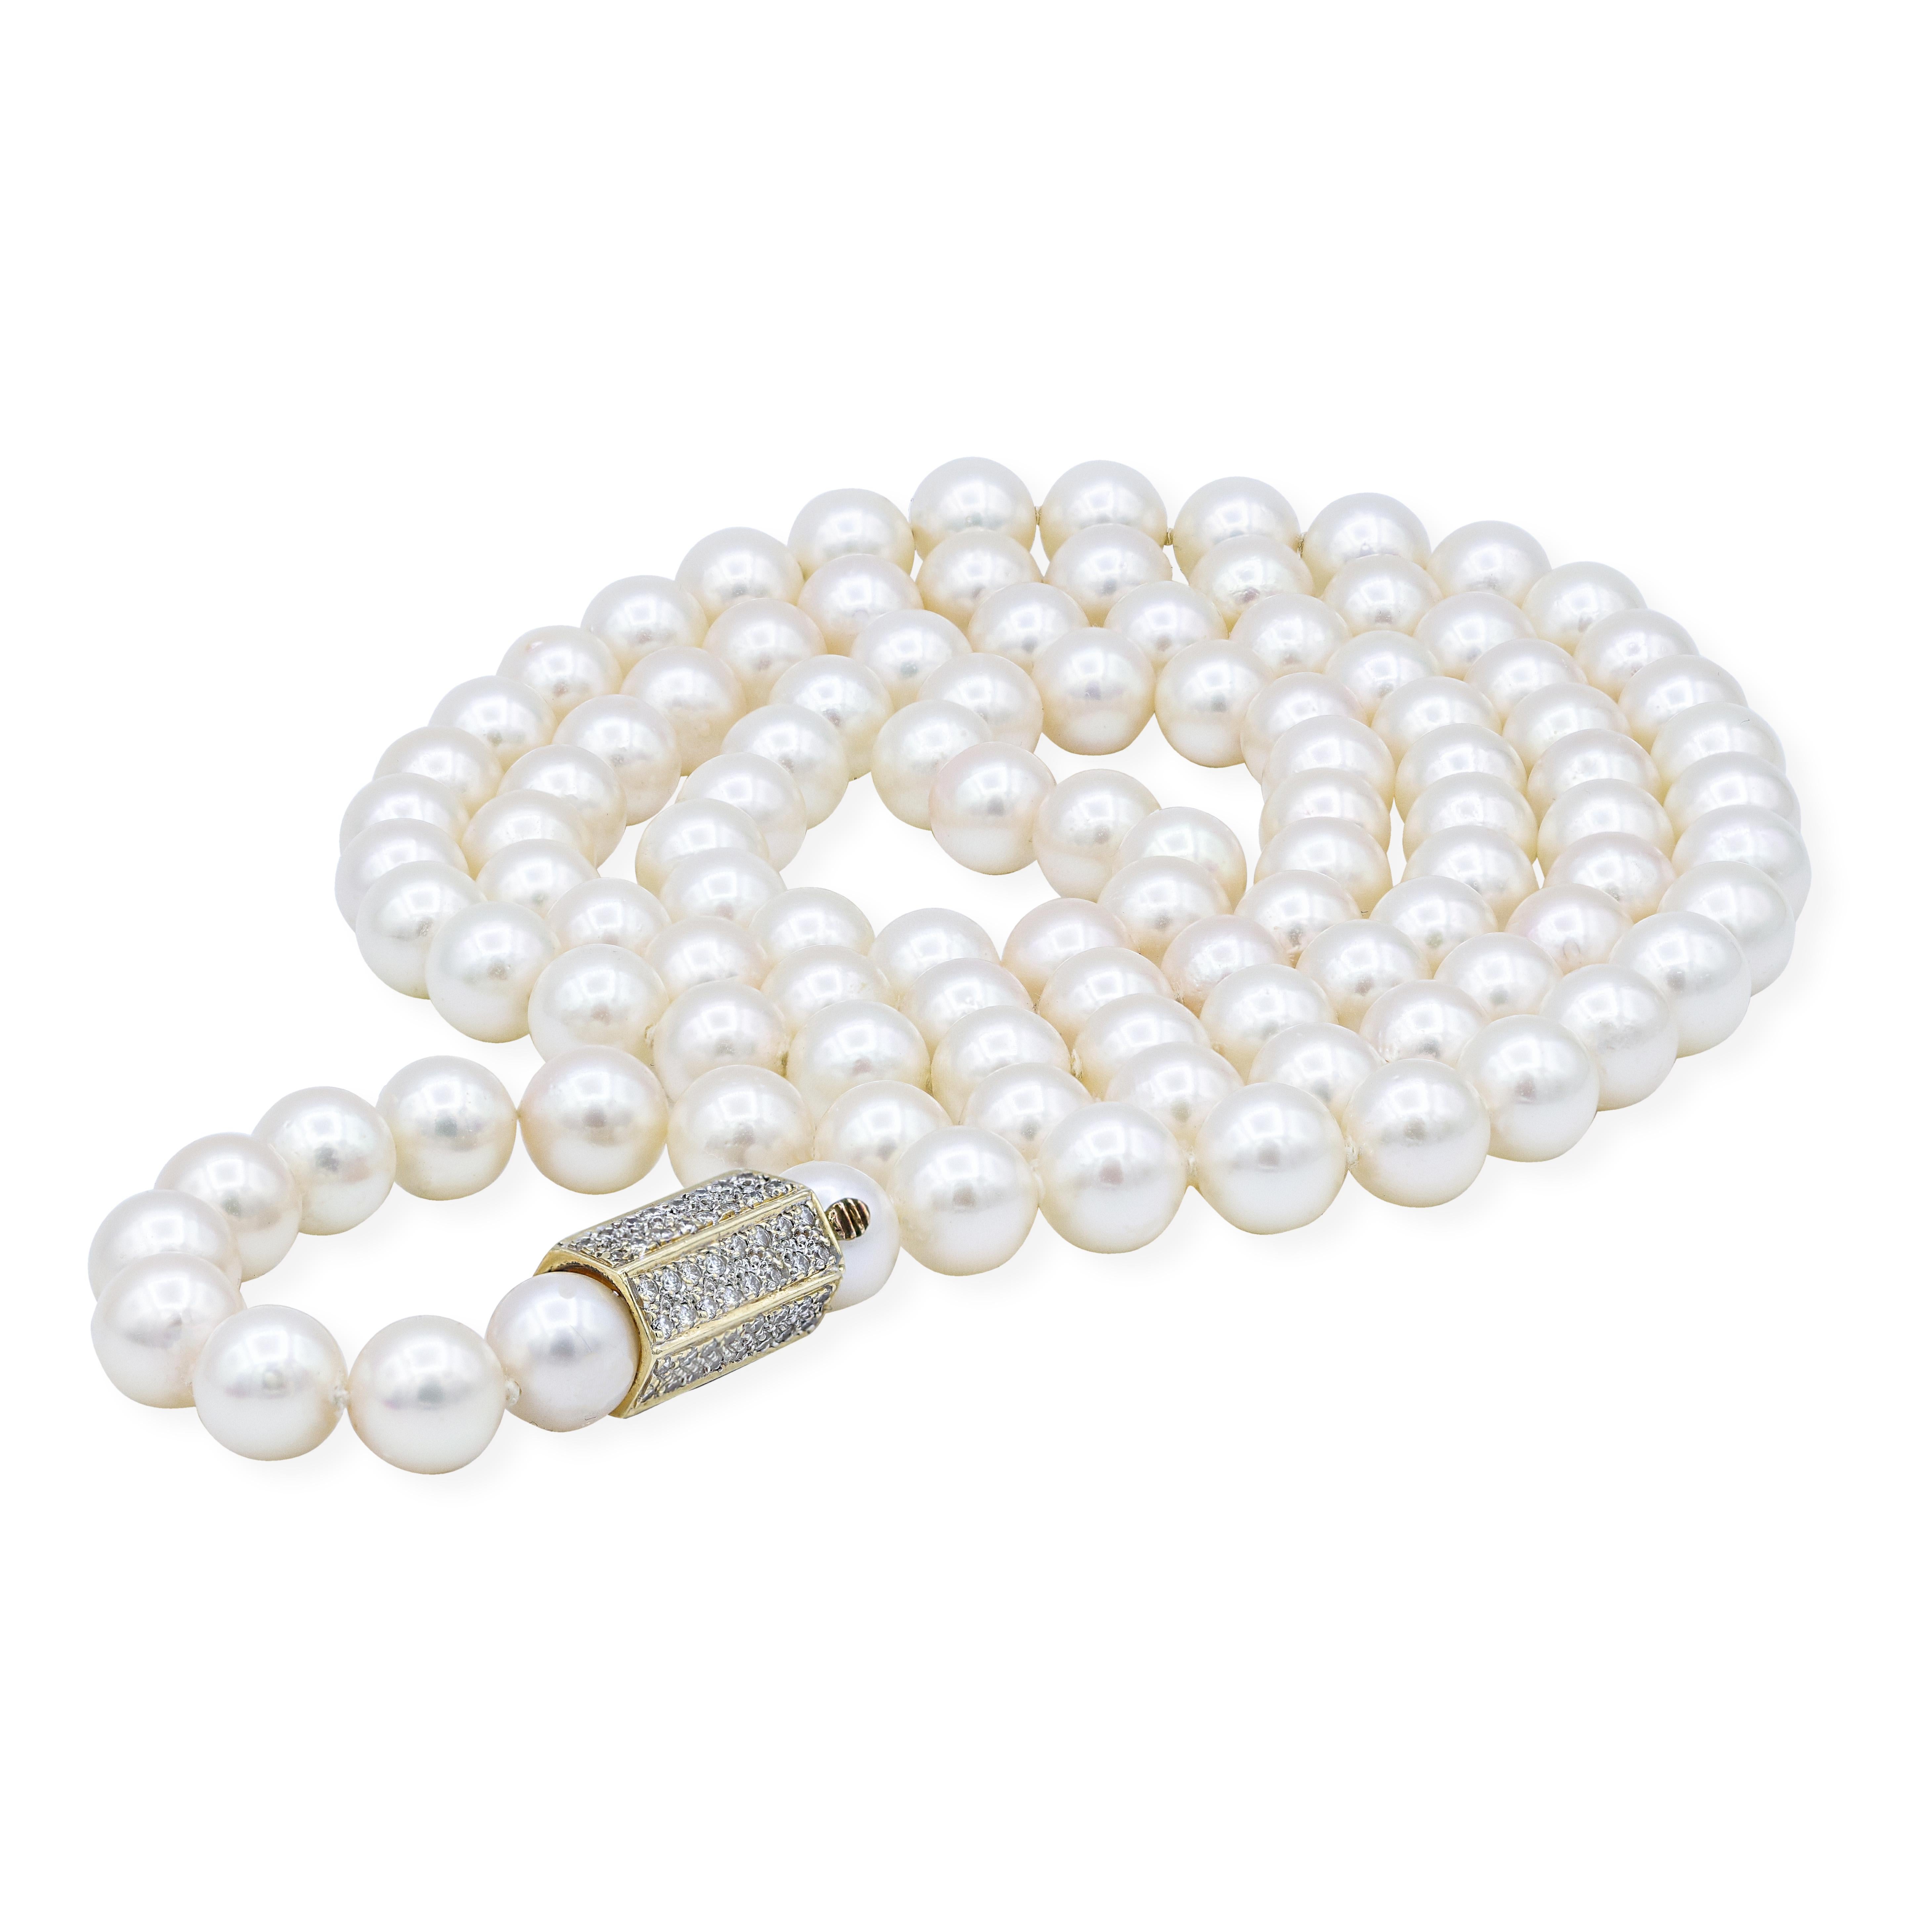 14K yellow gold white pearls necklace, 7mm-7.5mm, with diamond holder, features 1.00ct micropave round diamonds.
Lengh: 34''